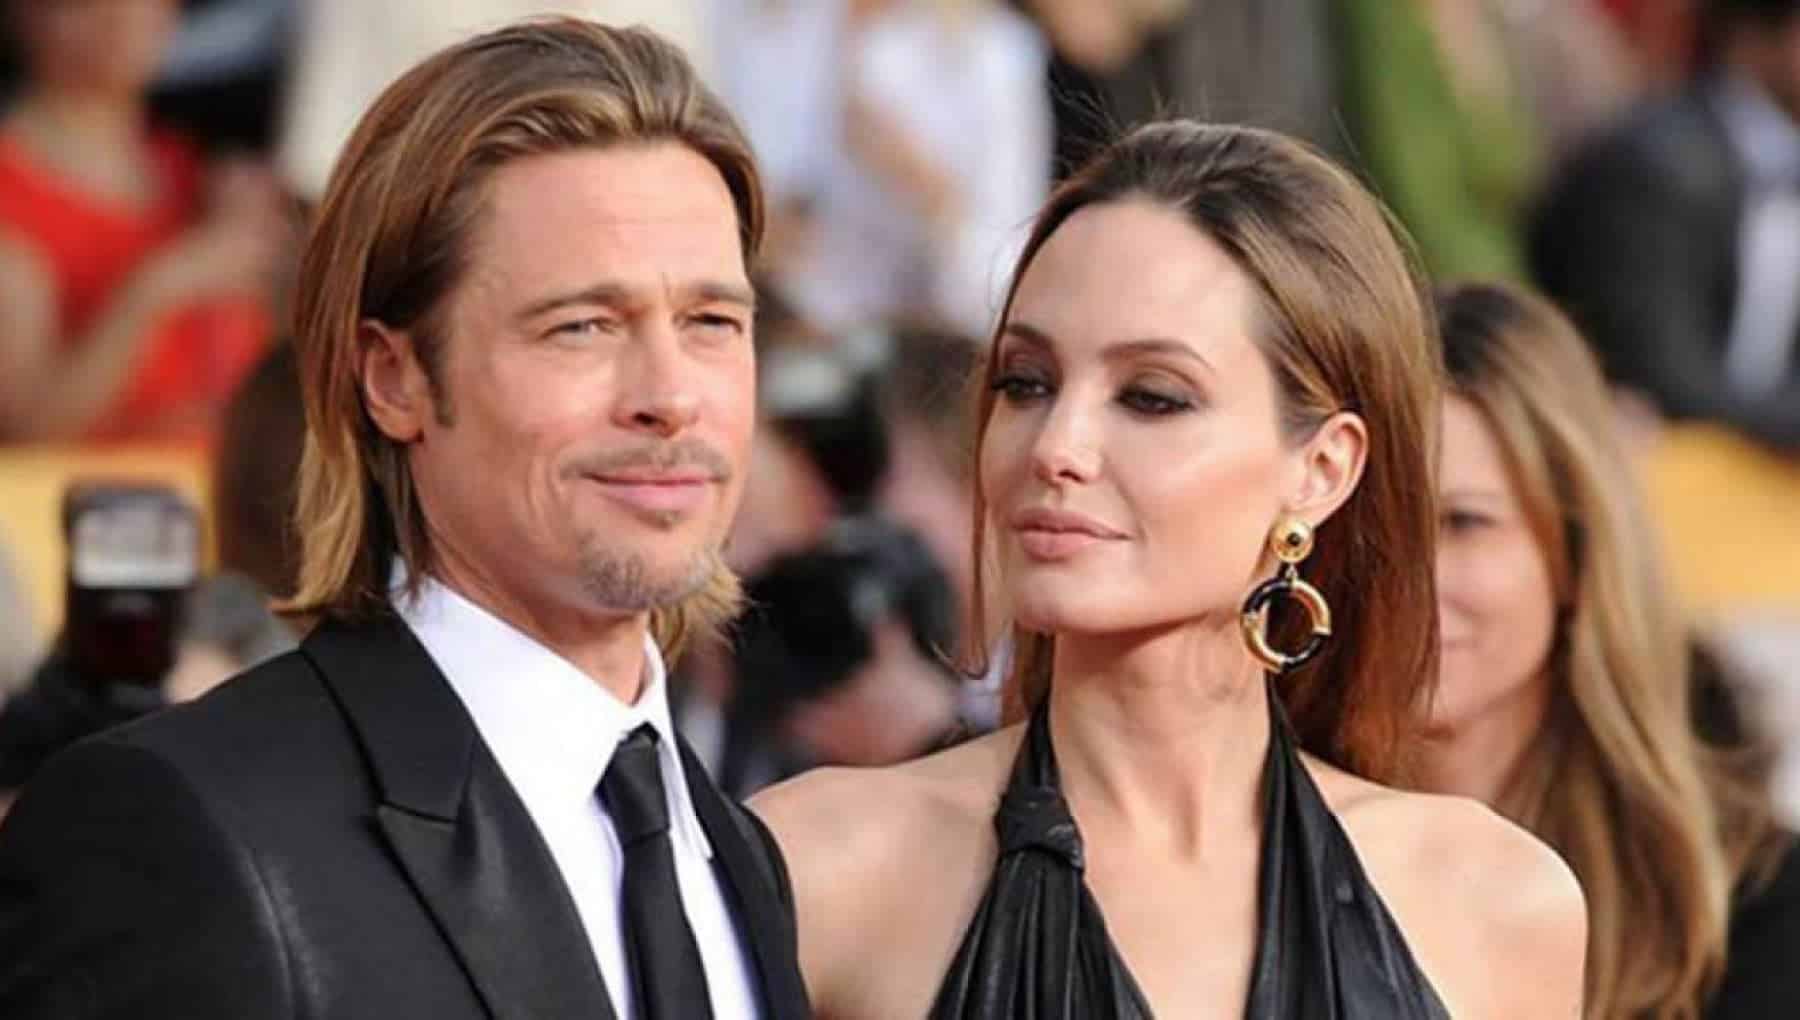 Pitt says Jolie sought 'harm' by selling vineyard stake to Russian oligarch